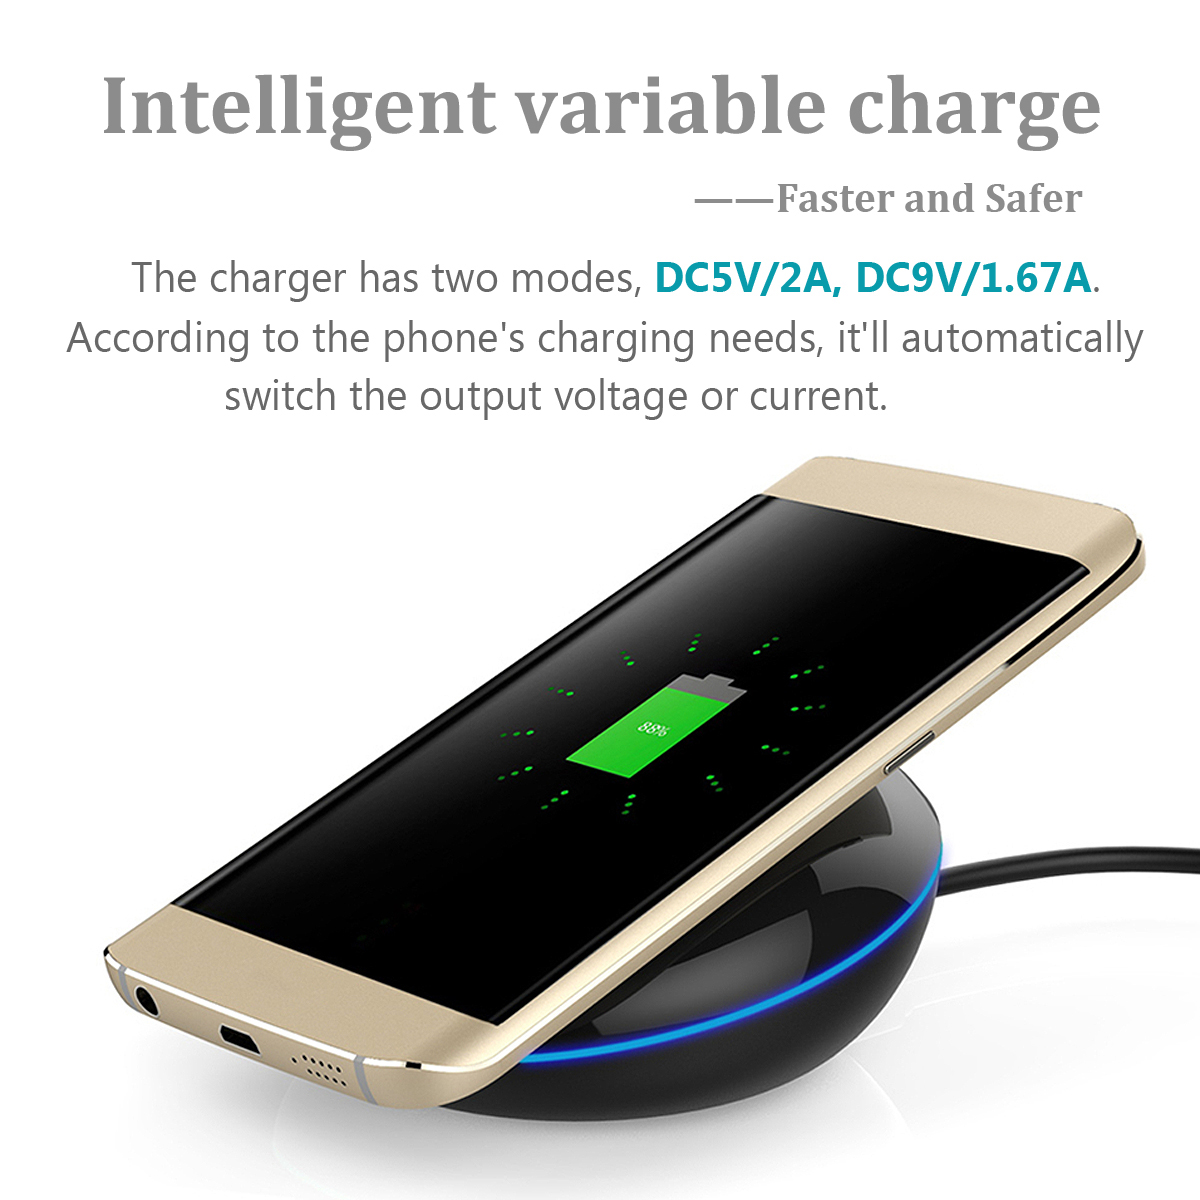 Bakeey-Qi-Wireless-Fast-Charger-With-LED-Indicator-For-iPhone-X-8Plus-Samsung-S7-S8-Note-8-1217829-3